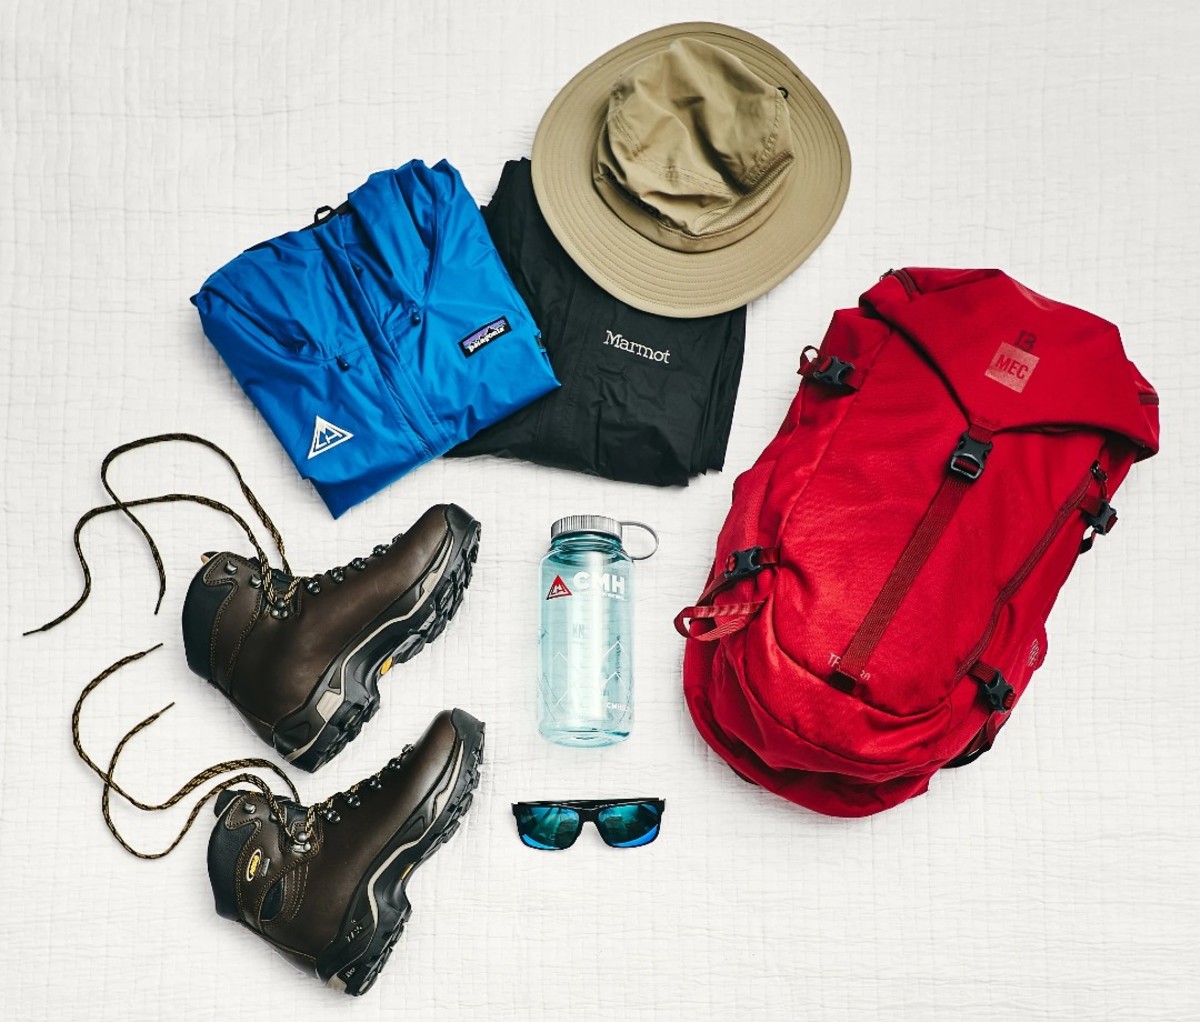 Hiking boots, blue and black jackets, sun hat, red backpack, sunglasses, and water bottle on white backdrop